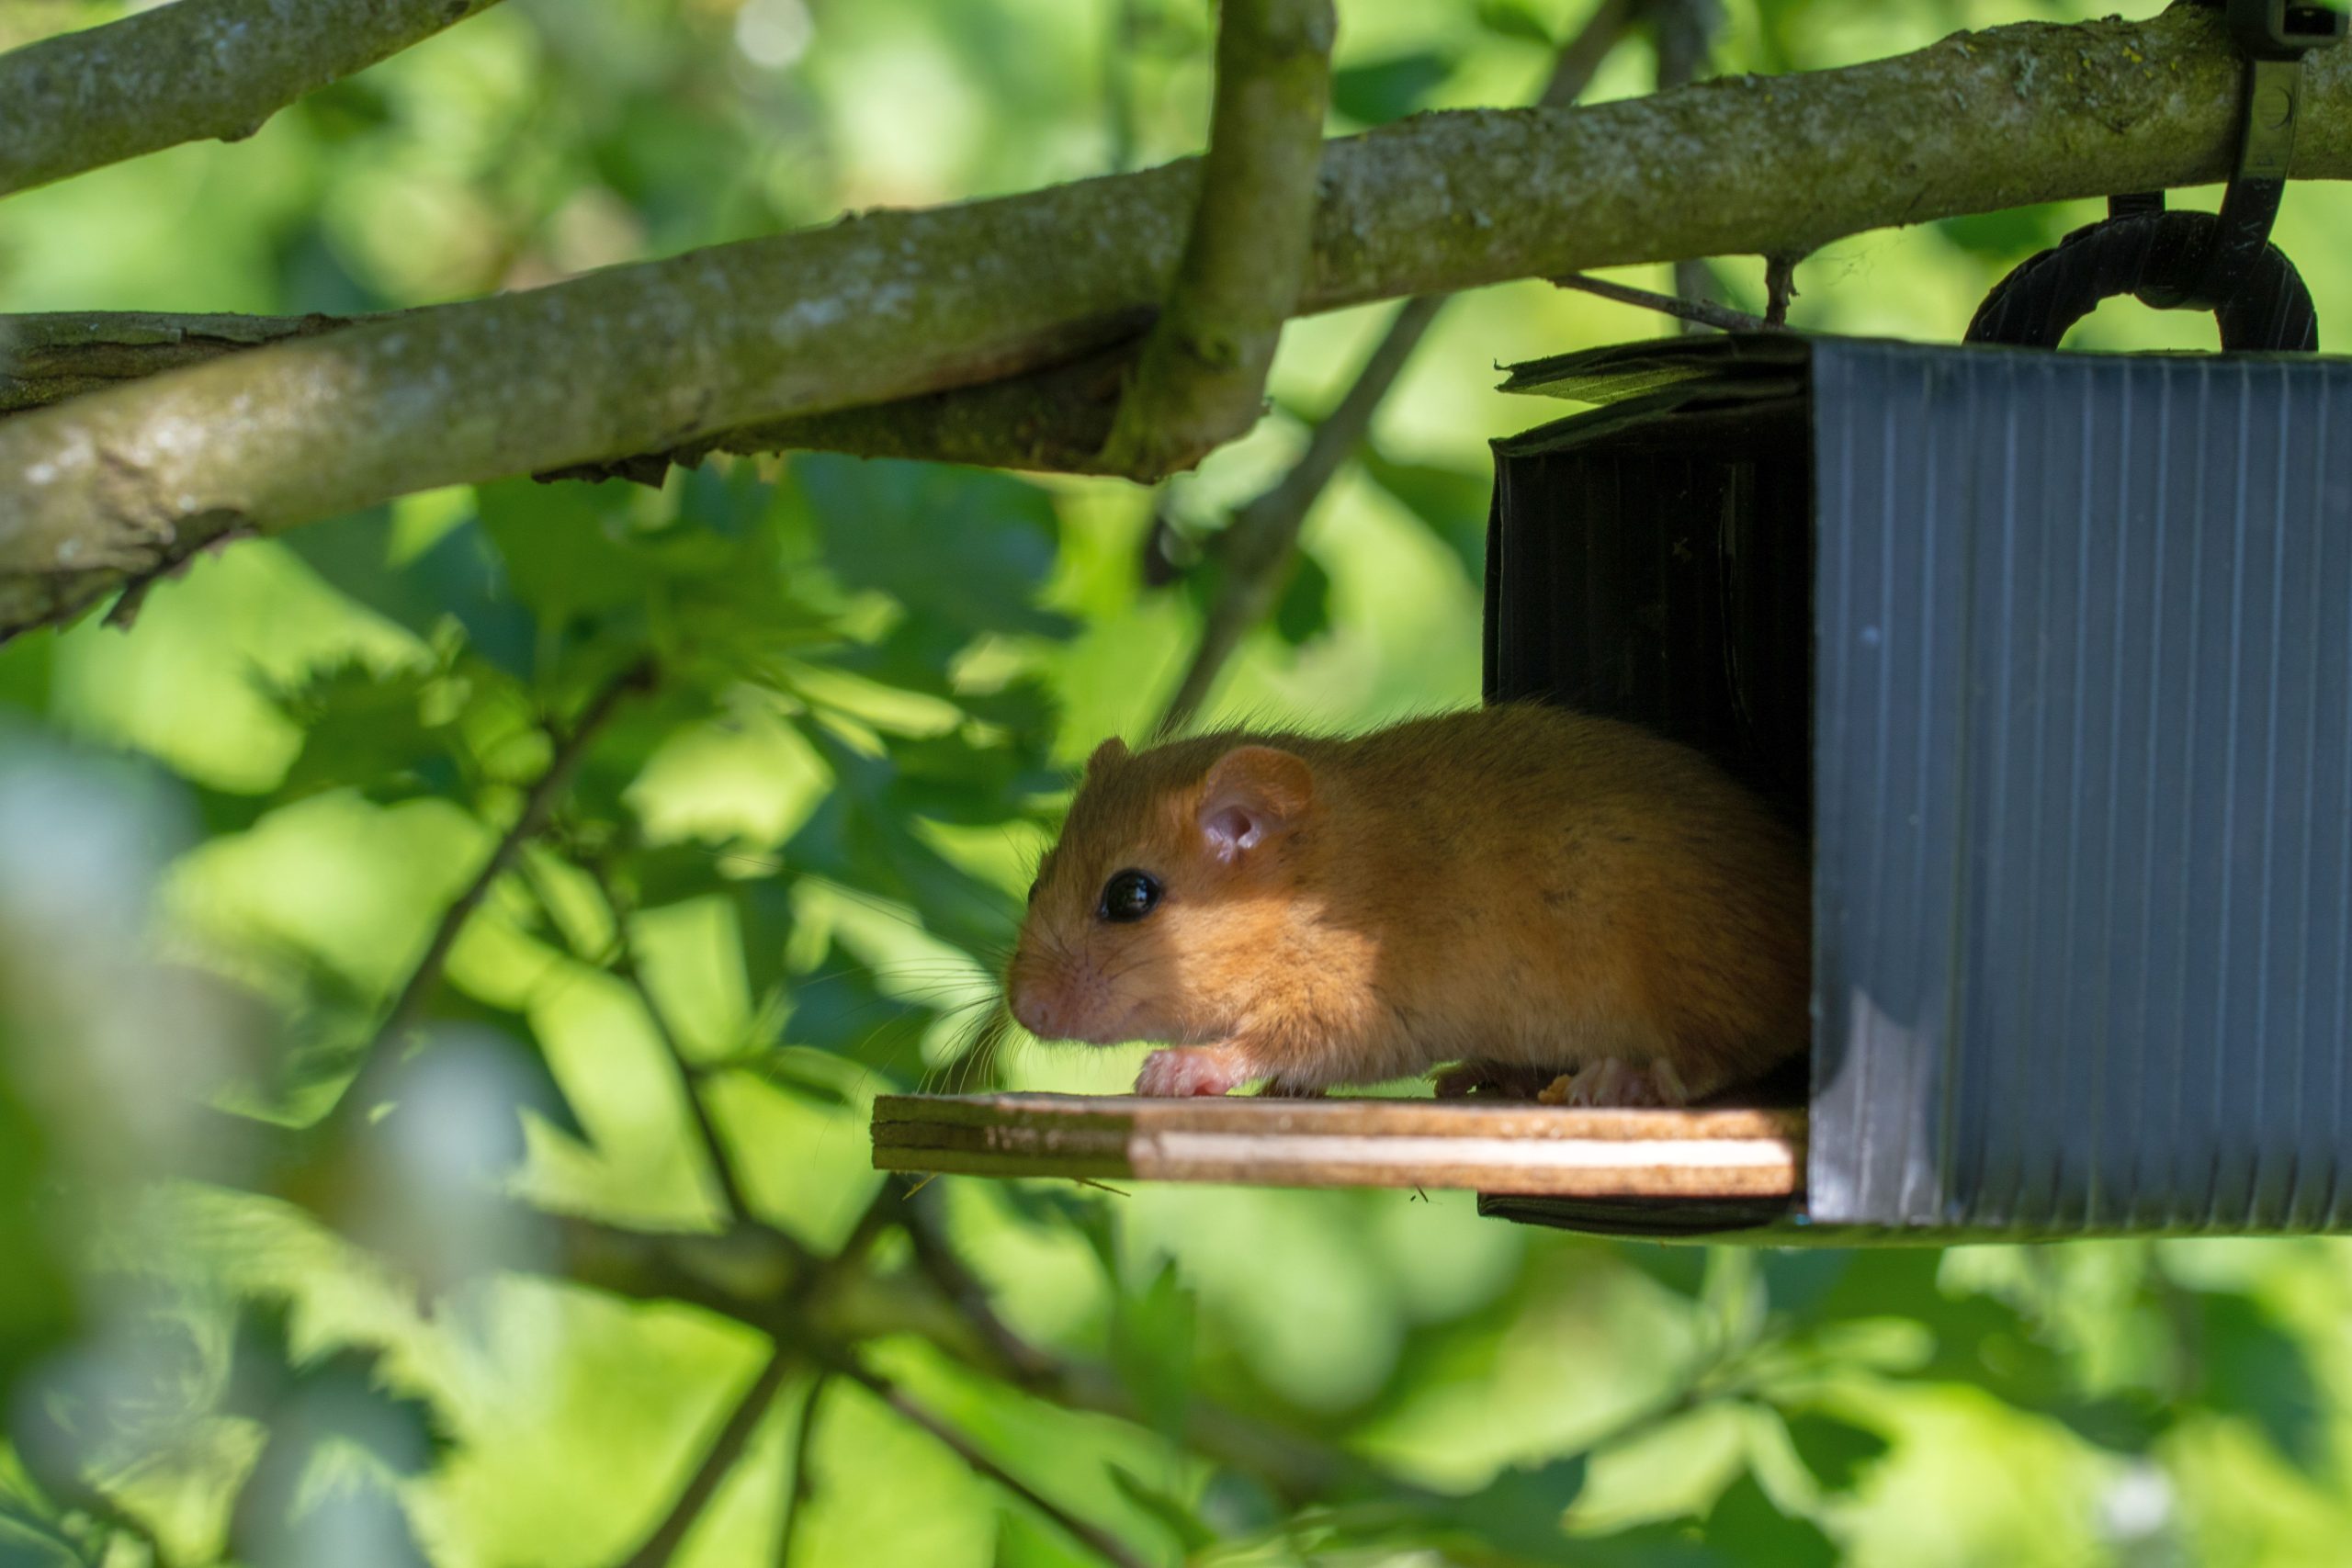 animal_habitats_the dormouse is sitting in a nest in a green tree